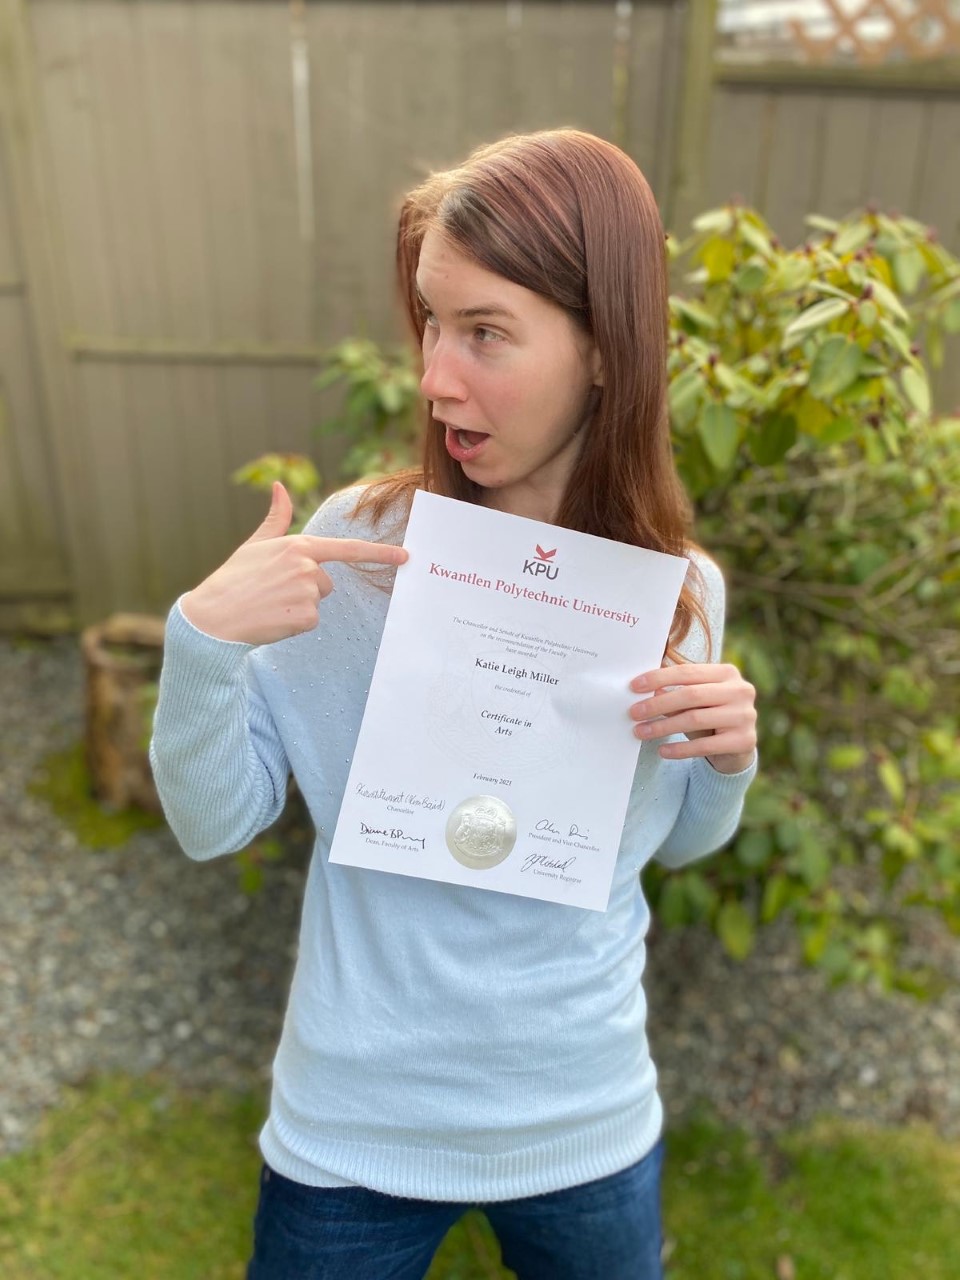 a young woman with long brown hair holds a certificate from Kwantlen Polytechnic University while pointing at it with one hand. She is looking off to the side and is making an expression of surprise. It shows her name in black text as Katie Leigh Miller. Text below that reads Certificate in Arts. there are signatures and a large golden seal at the bottom of the certificate. Katie is wearing a light blue sweater and dark blue jeans. She is standing in what appears to be a back yard with a tall wooden fence behind her.